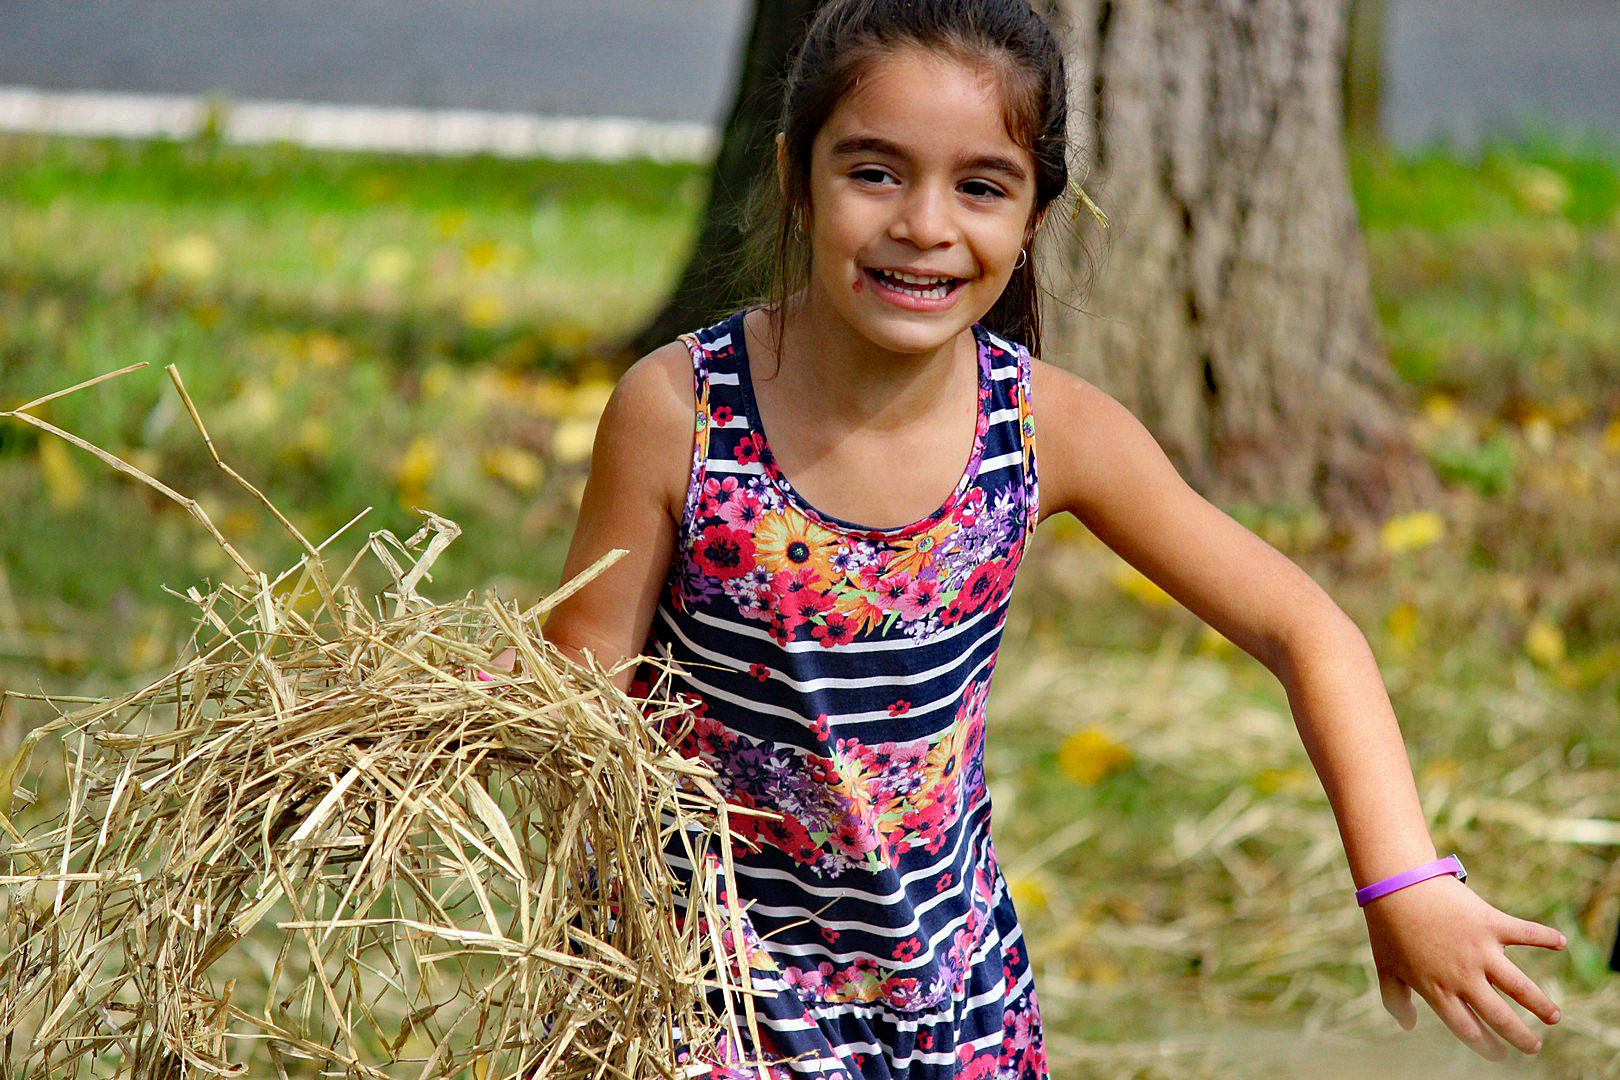 A young girl smiles as she gathers straw to stuff in a scarecrow